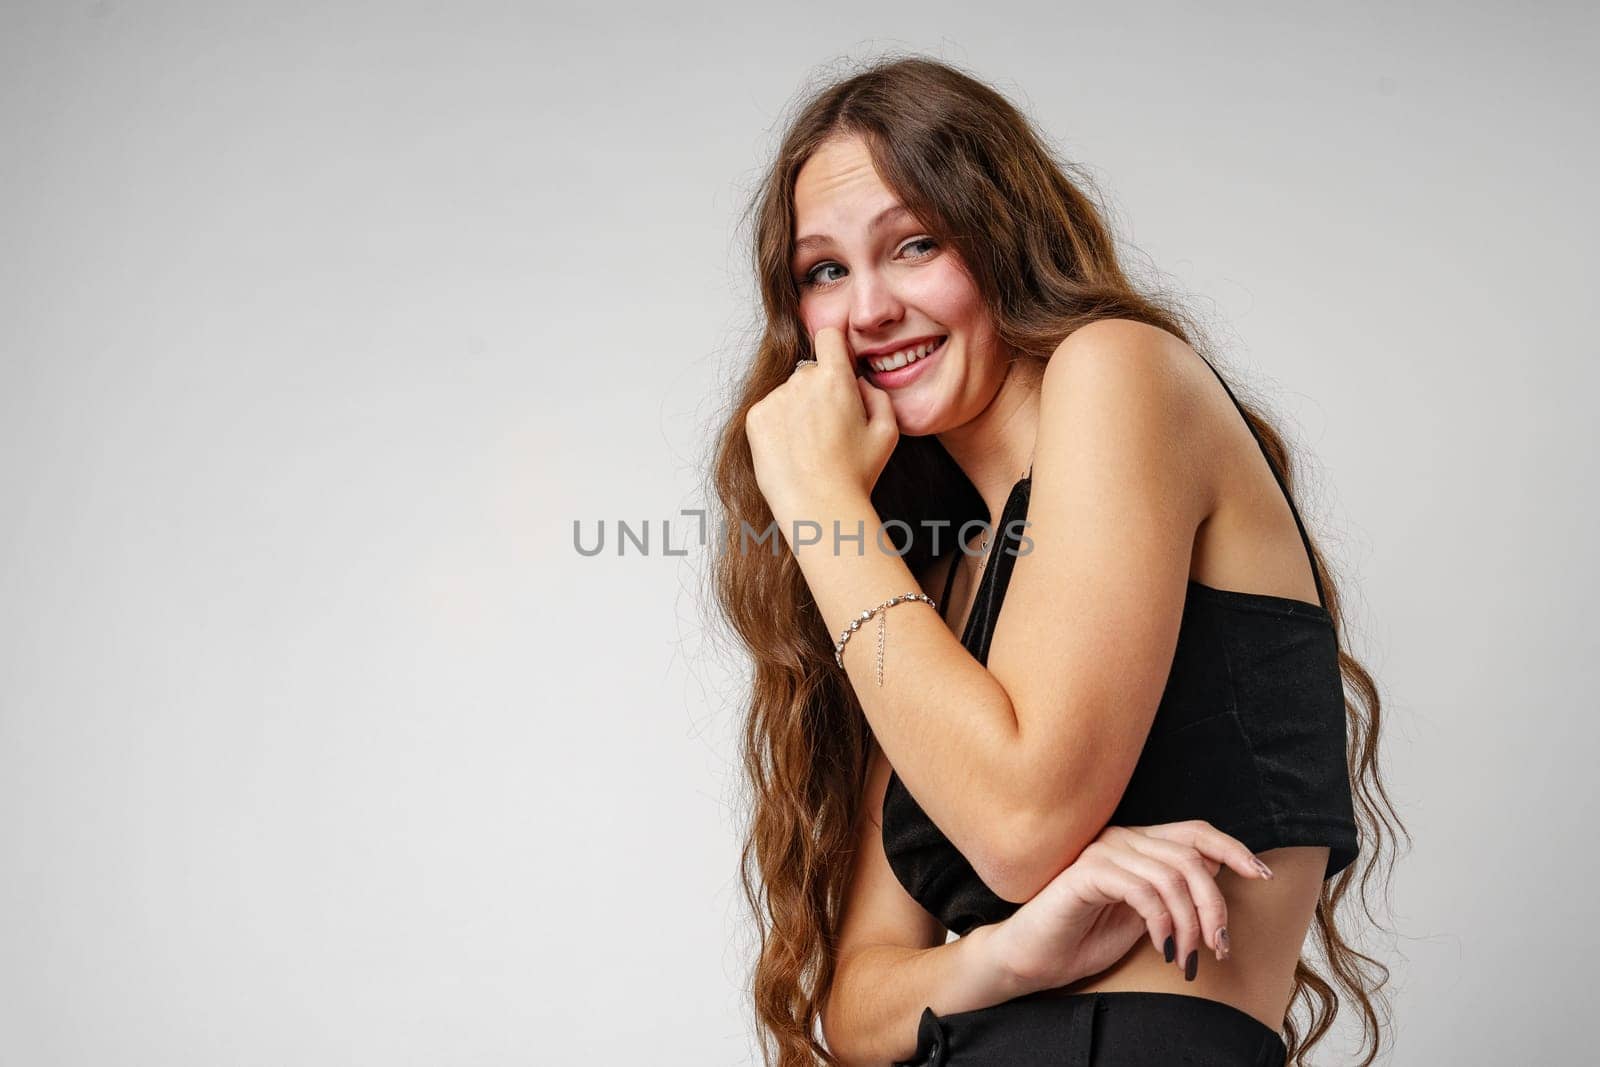 Smiling Young Woman Posing in a Black Top Against a Grey Background by Fabrikasimf